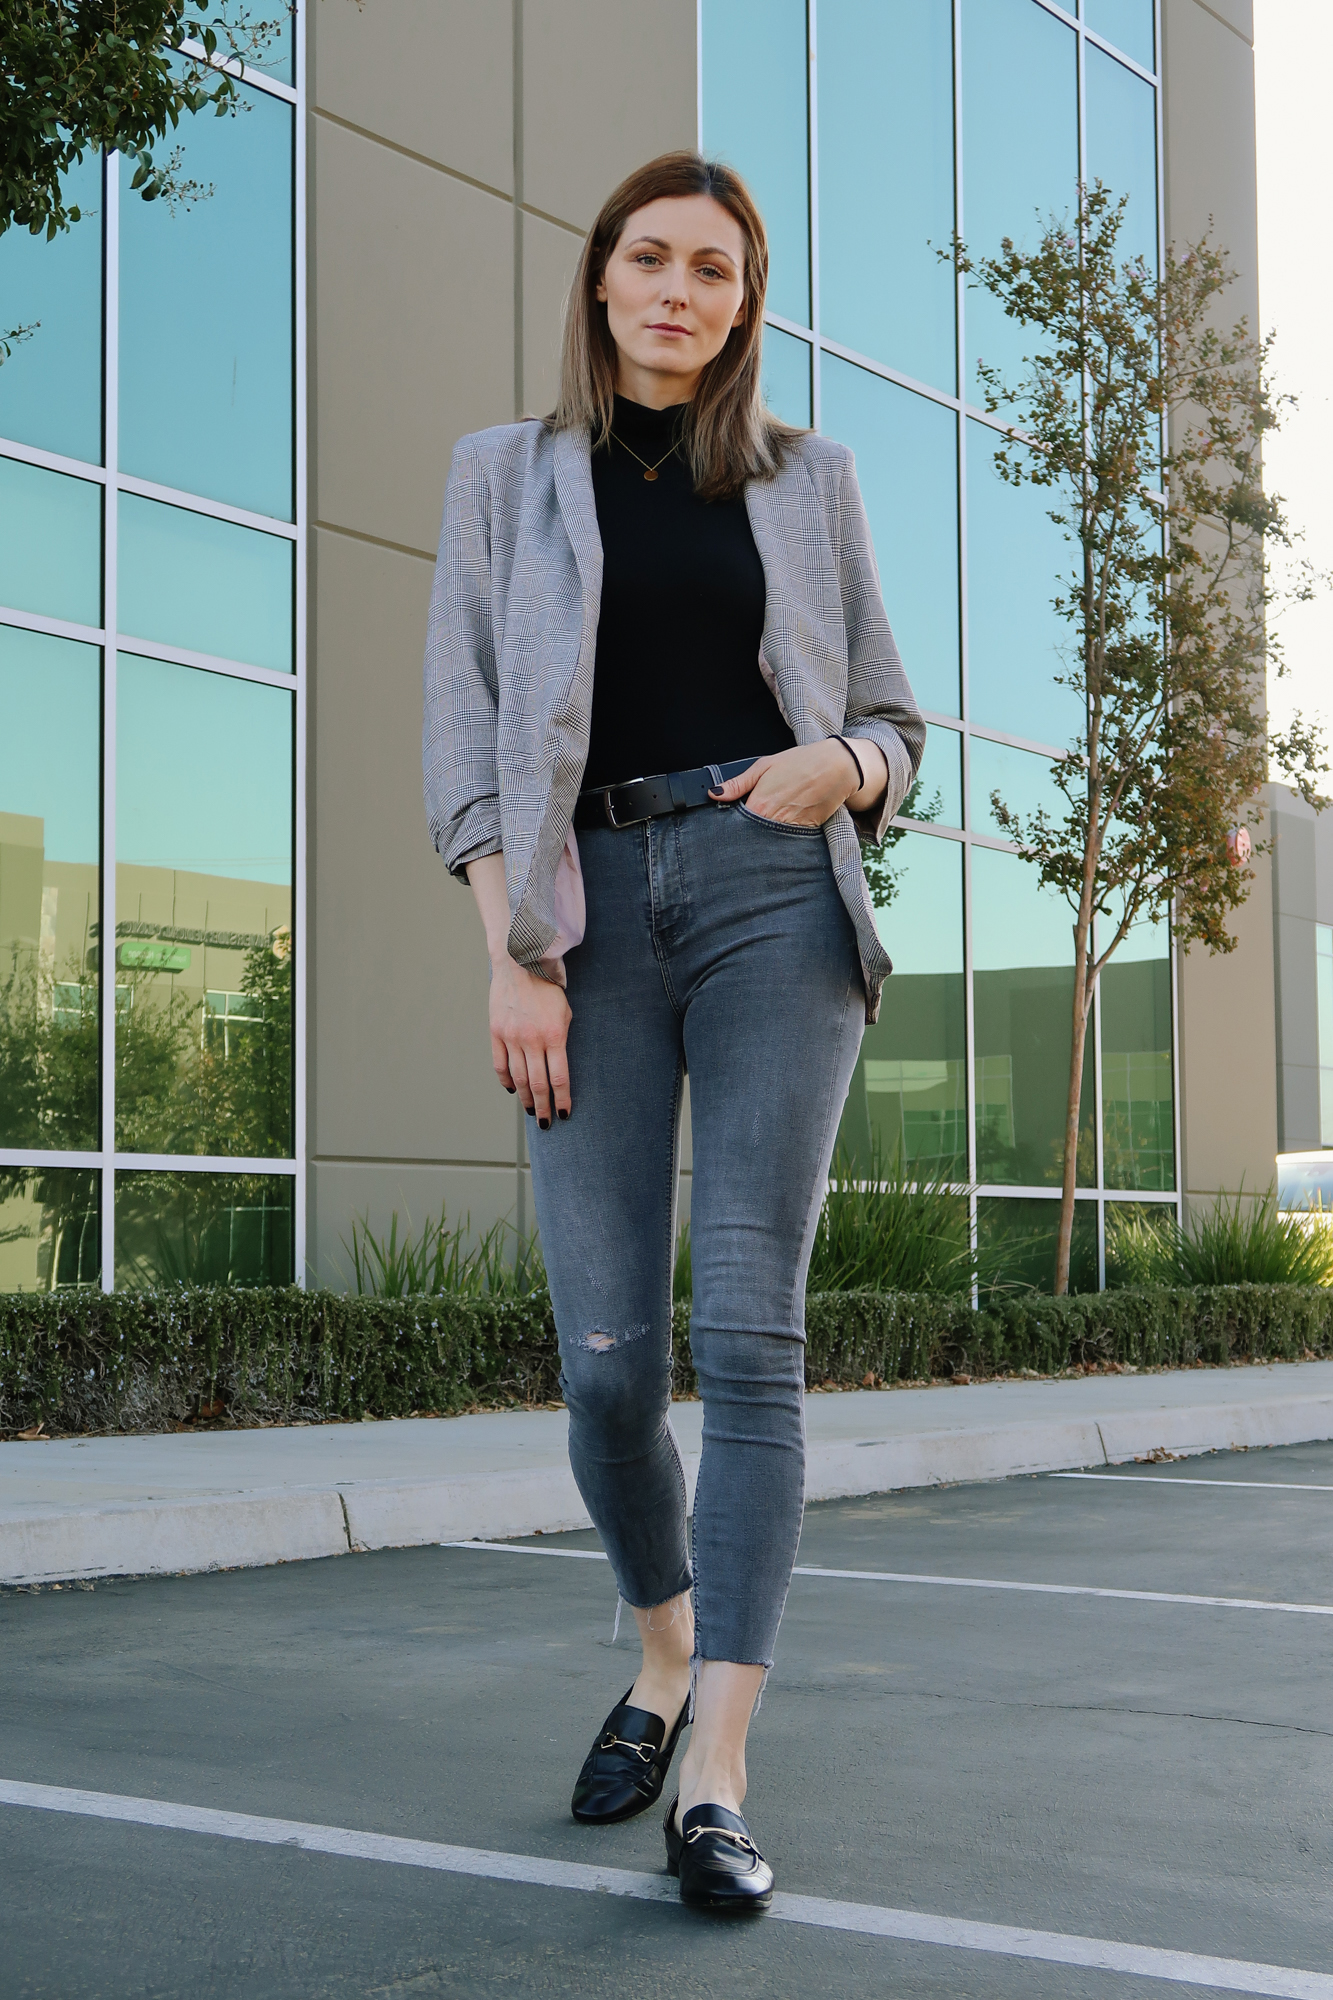 Casual outfit with a plaid blazer | Easy Casual Outfits To Try Right Now by popular California fashion blog, Tea Cups and Tulips: image of a woman outside wearing a SheIn Shawl Collar Pocket Patched Plaid Blazer, Amazon Happiness Boutique Circle Necklace, and Zara ZW PREMIUM SKINNY JEANS IN ARCTIC GRAY.